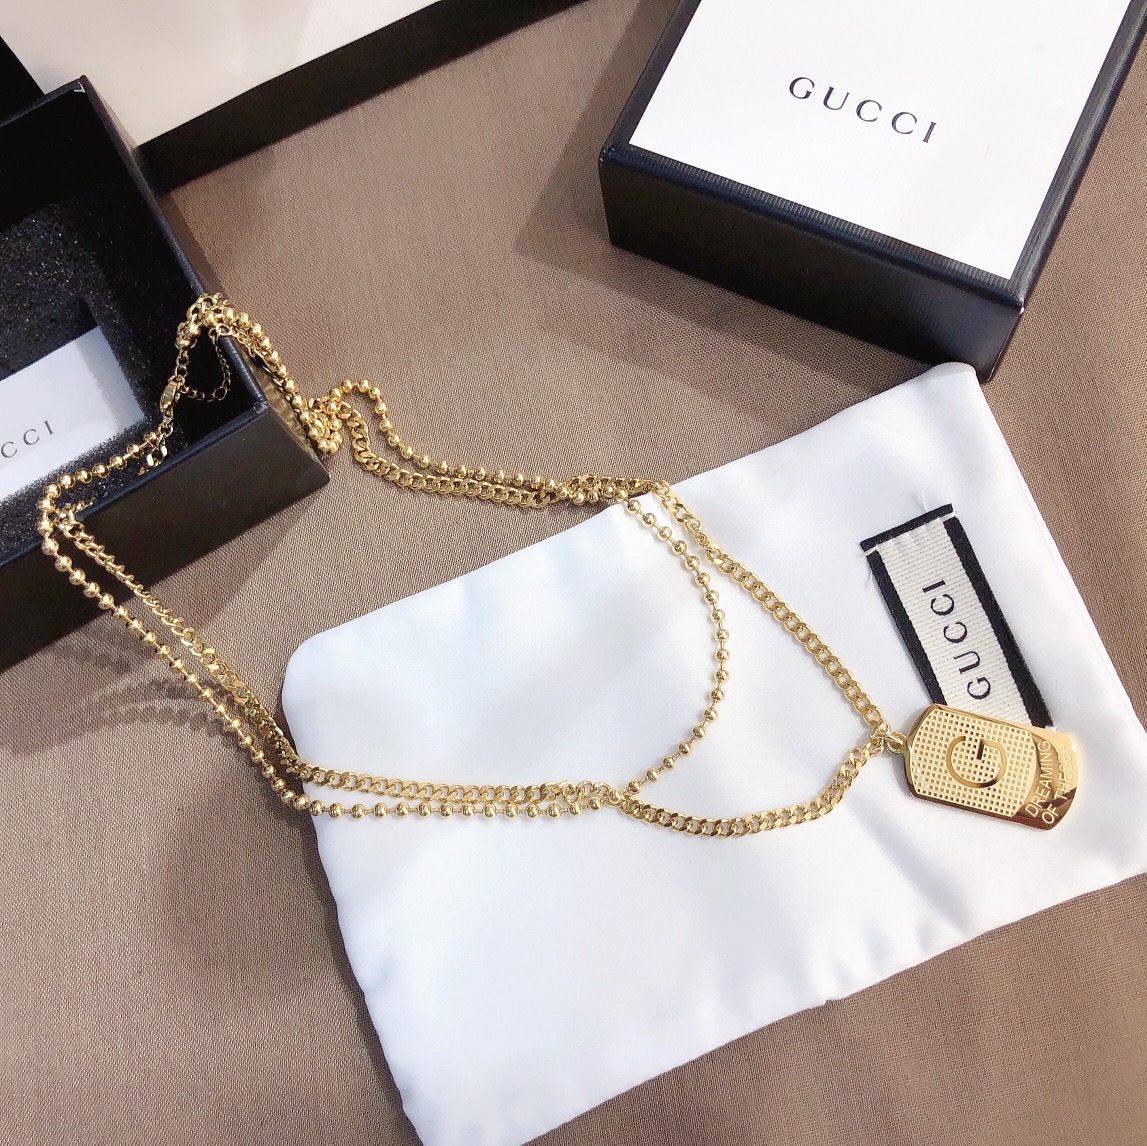 X415     Gucci necklace 107407